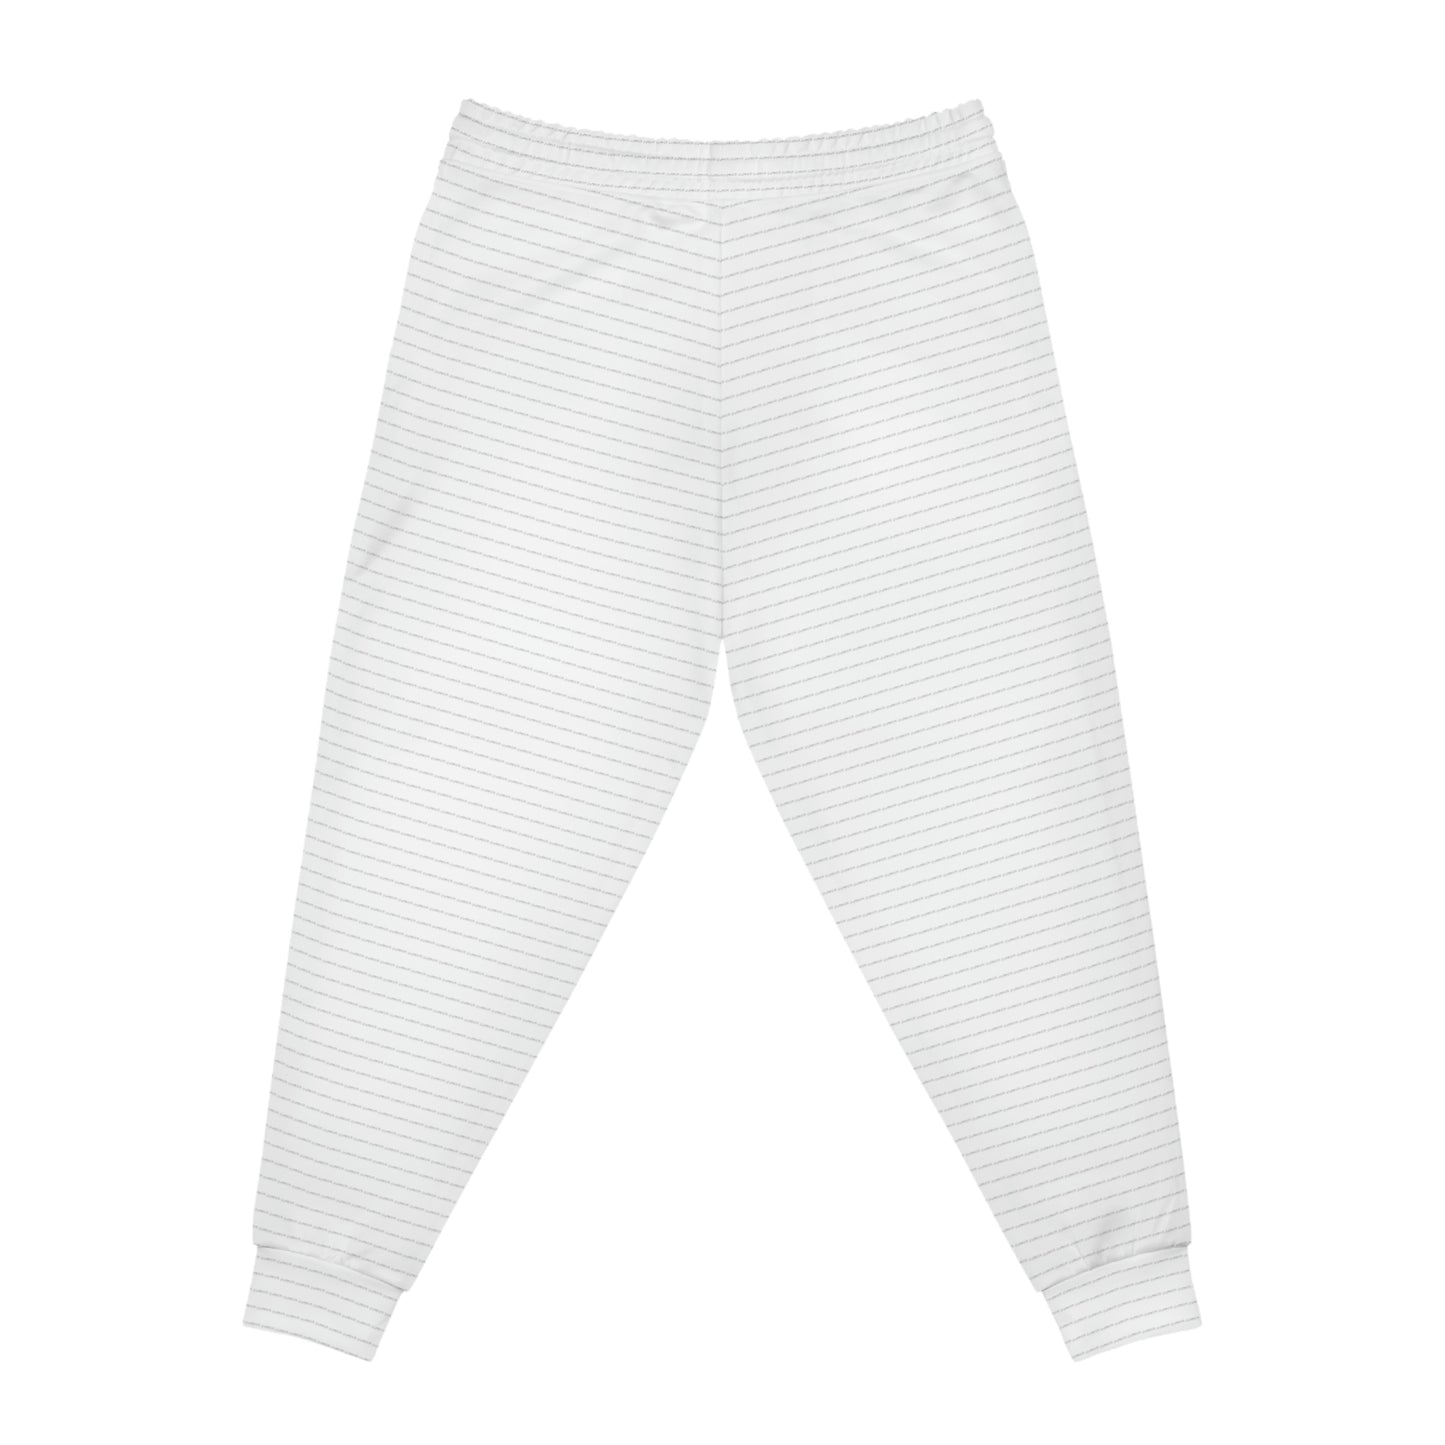 OWN MAN Athletic Joggers